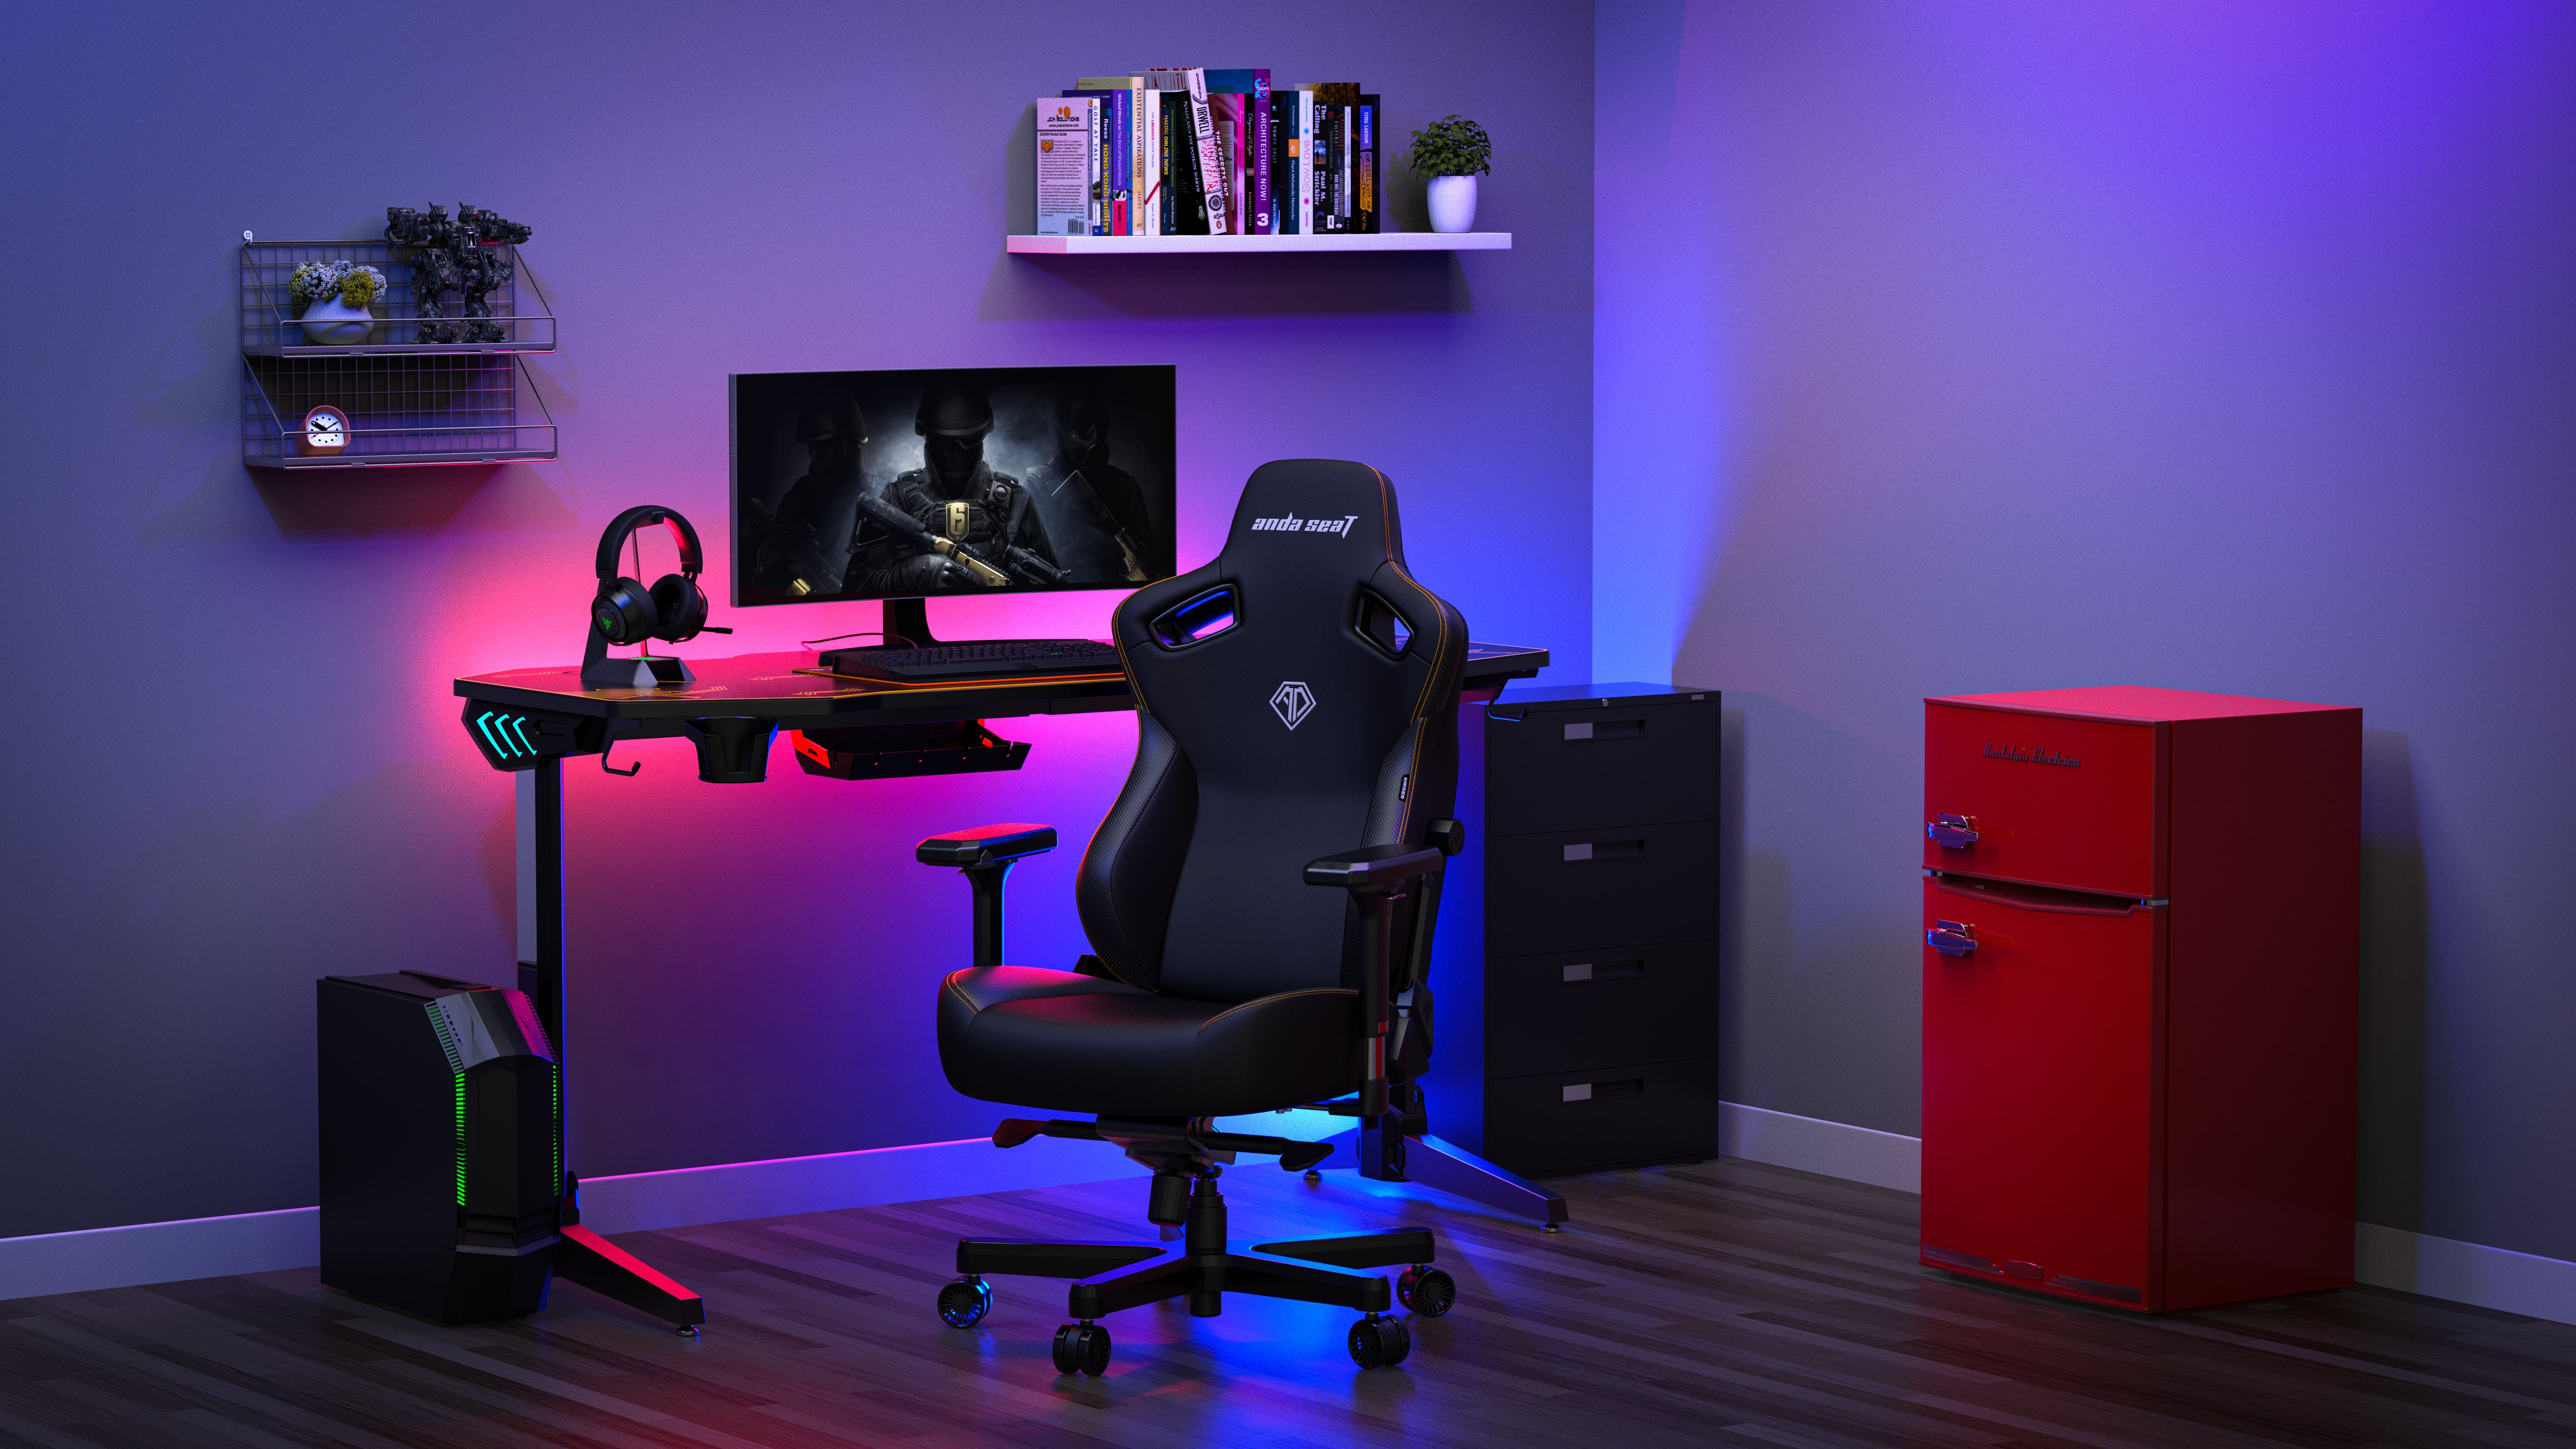 Andaseat Kaiser 3 Gaming Chair Review